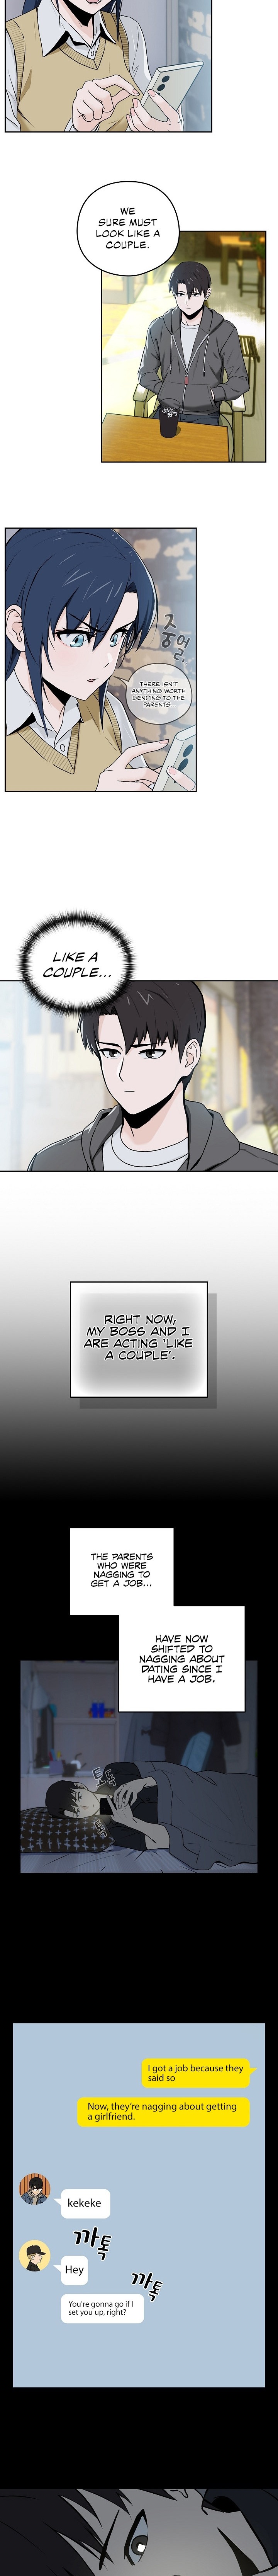 After Work Love Affairs - Chapter 1 Page 11